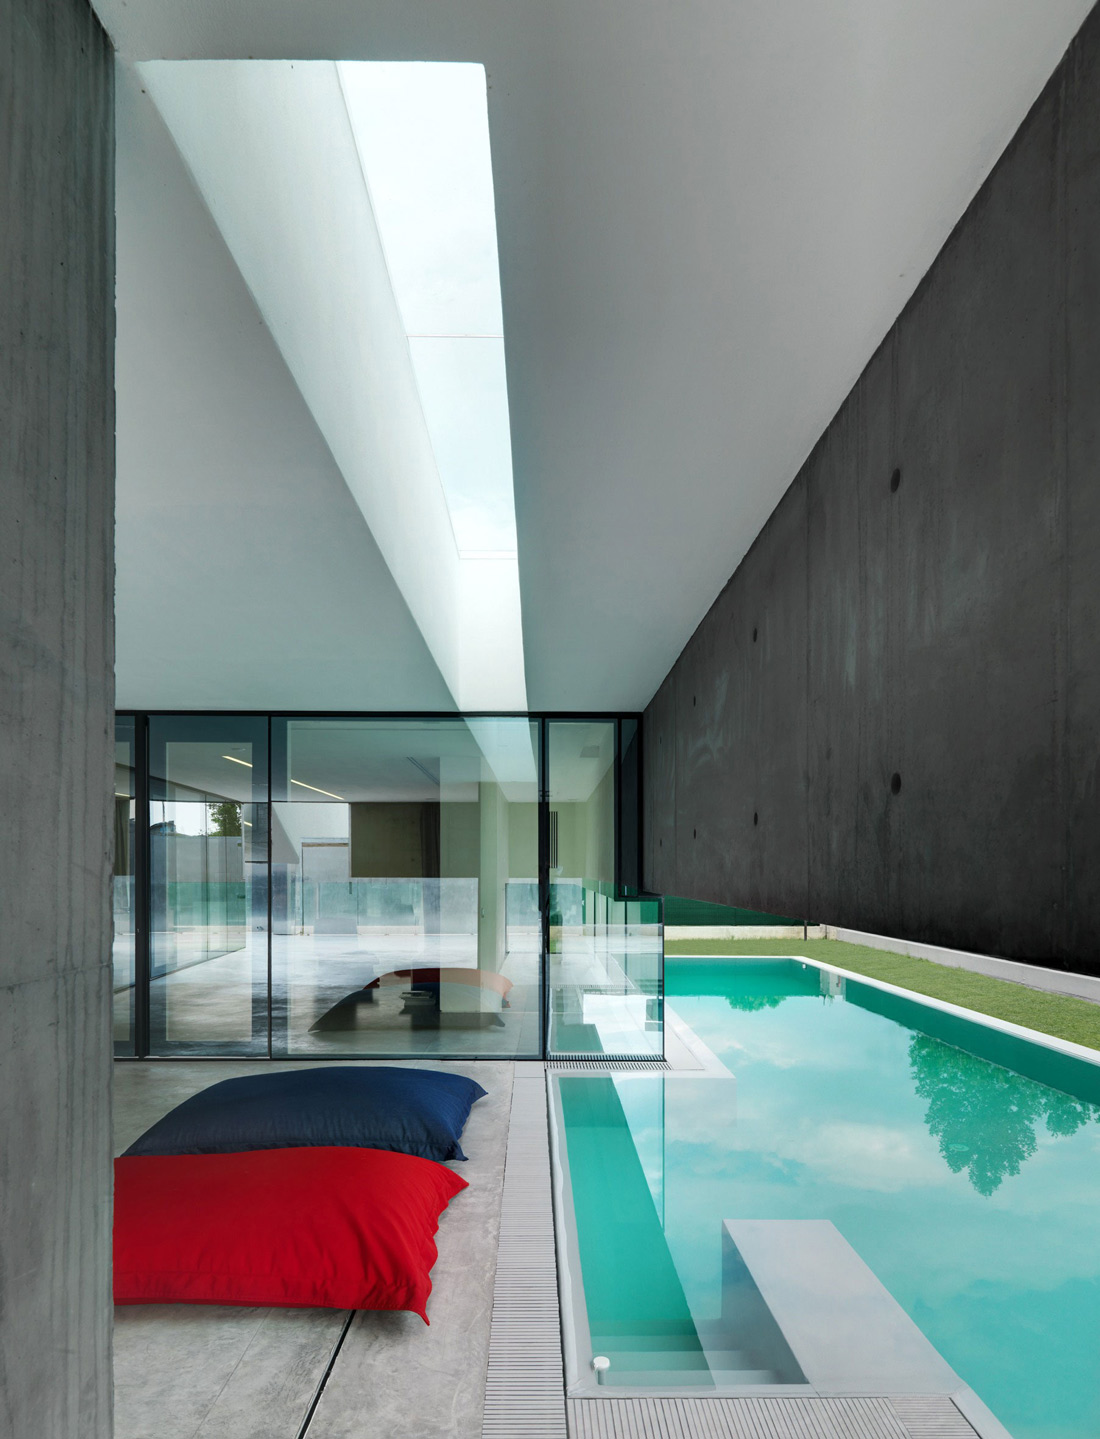 Outdoor Living Area, Pool, Patio Doors, Concrete and Glass Home in Urgnano, Italy